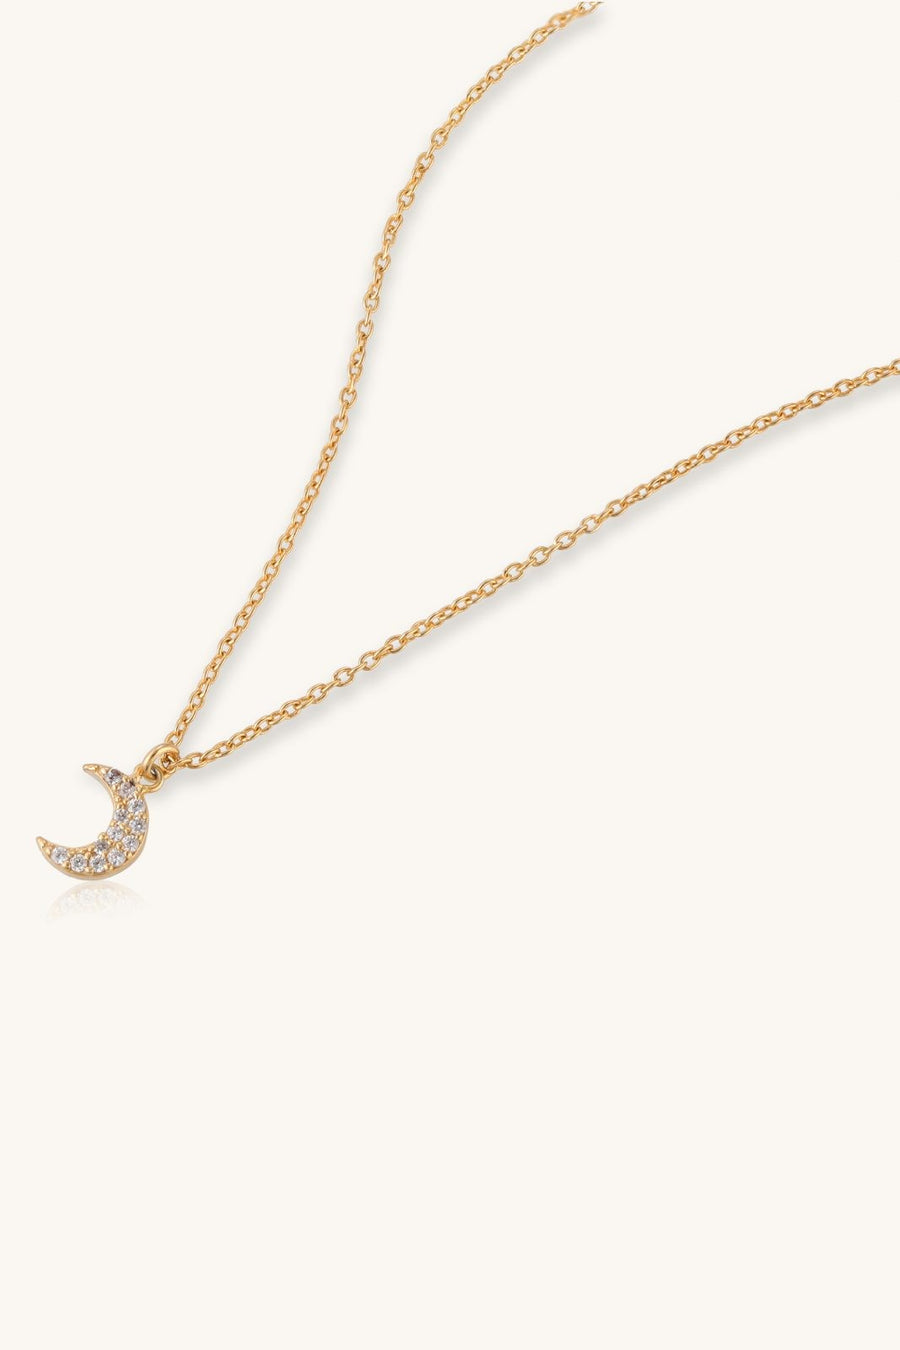 Gold, Crescent, Necklace, Jewelry, Fashion, Style, Accessories.